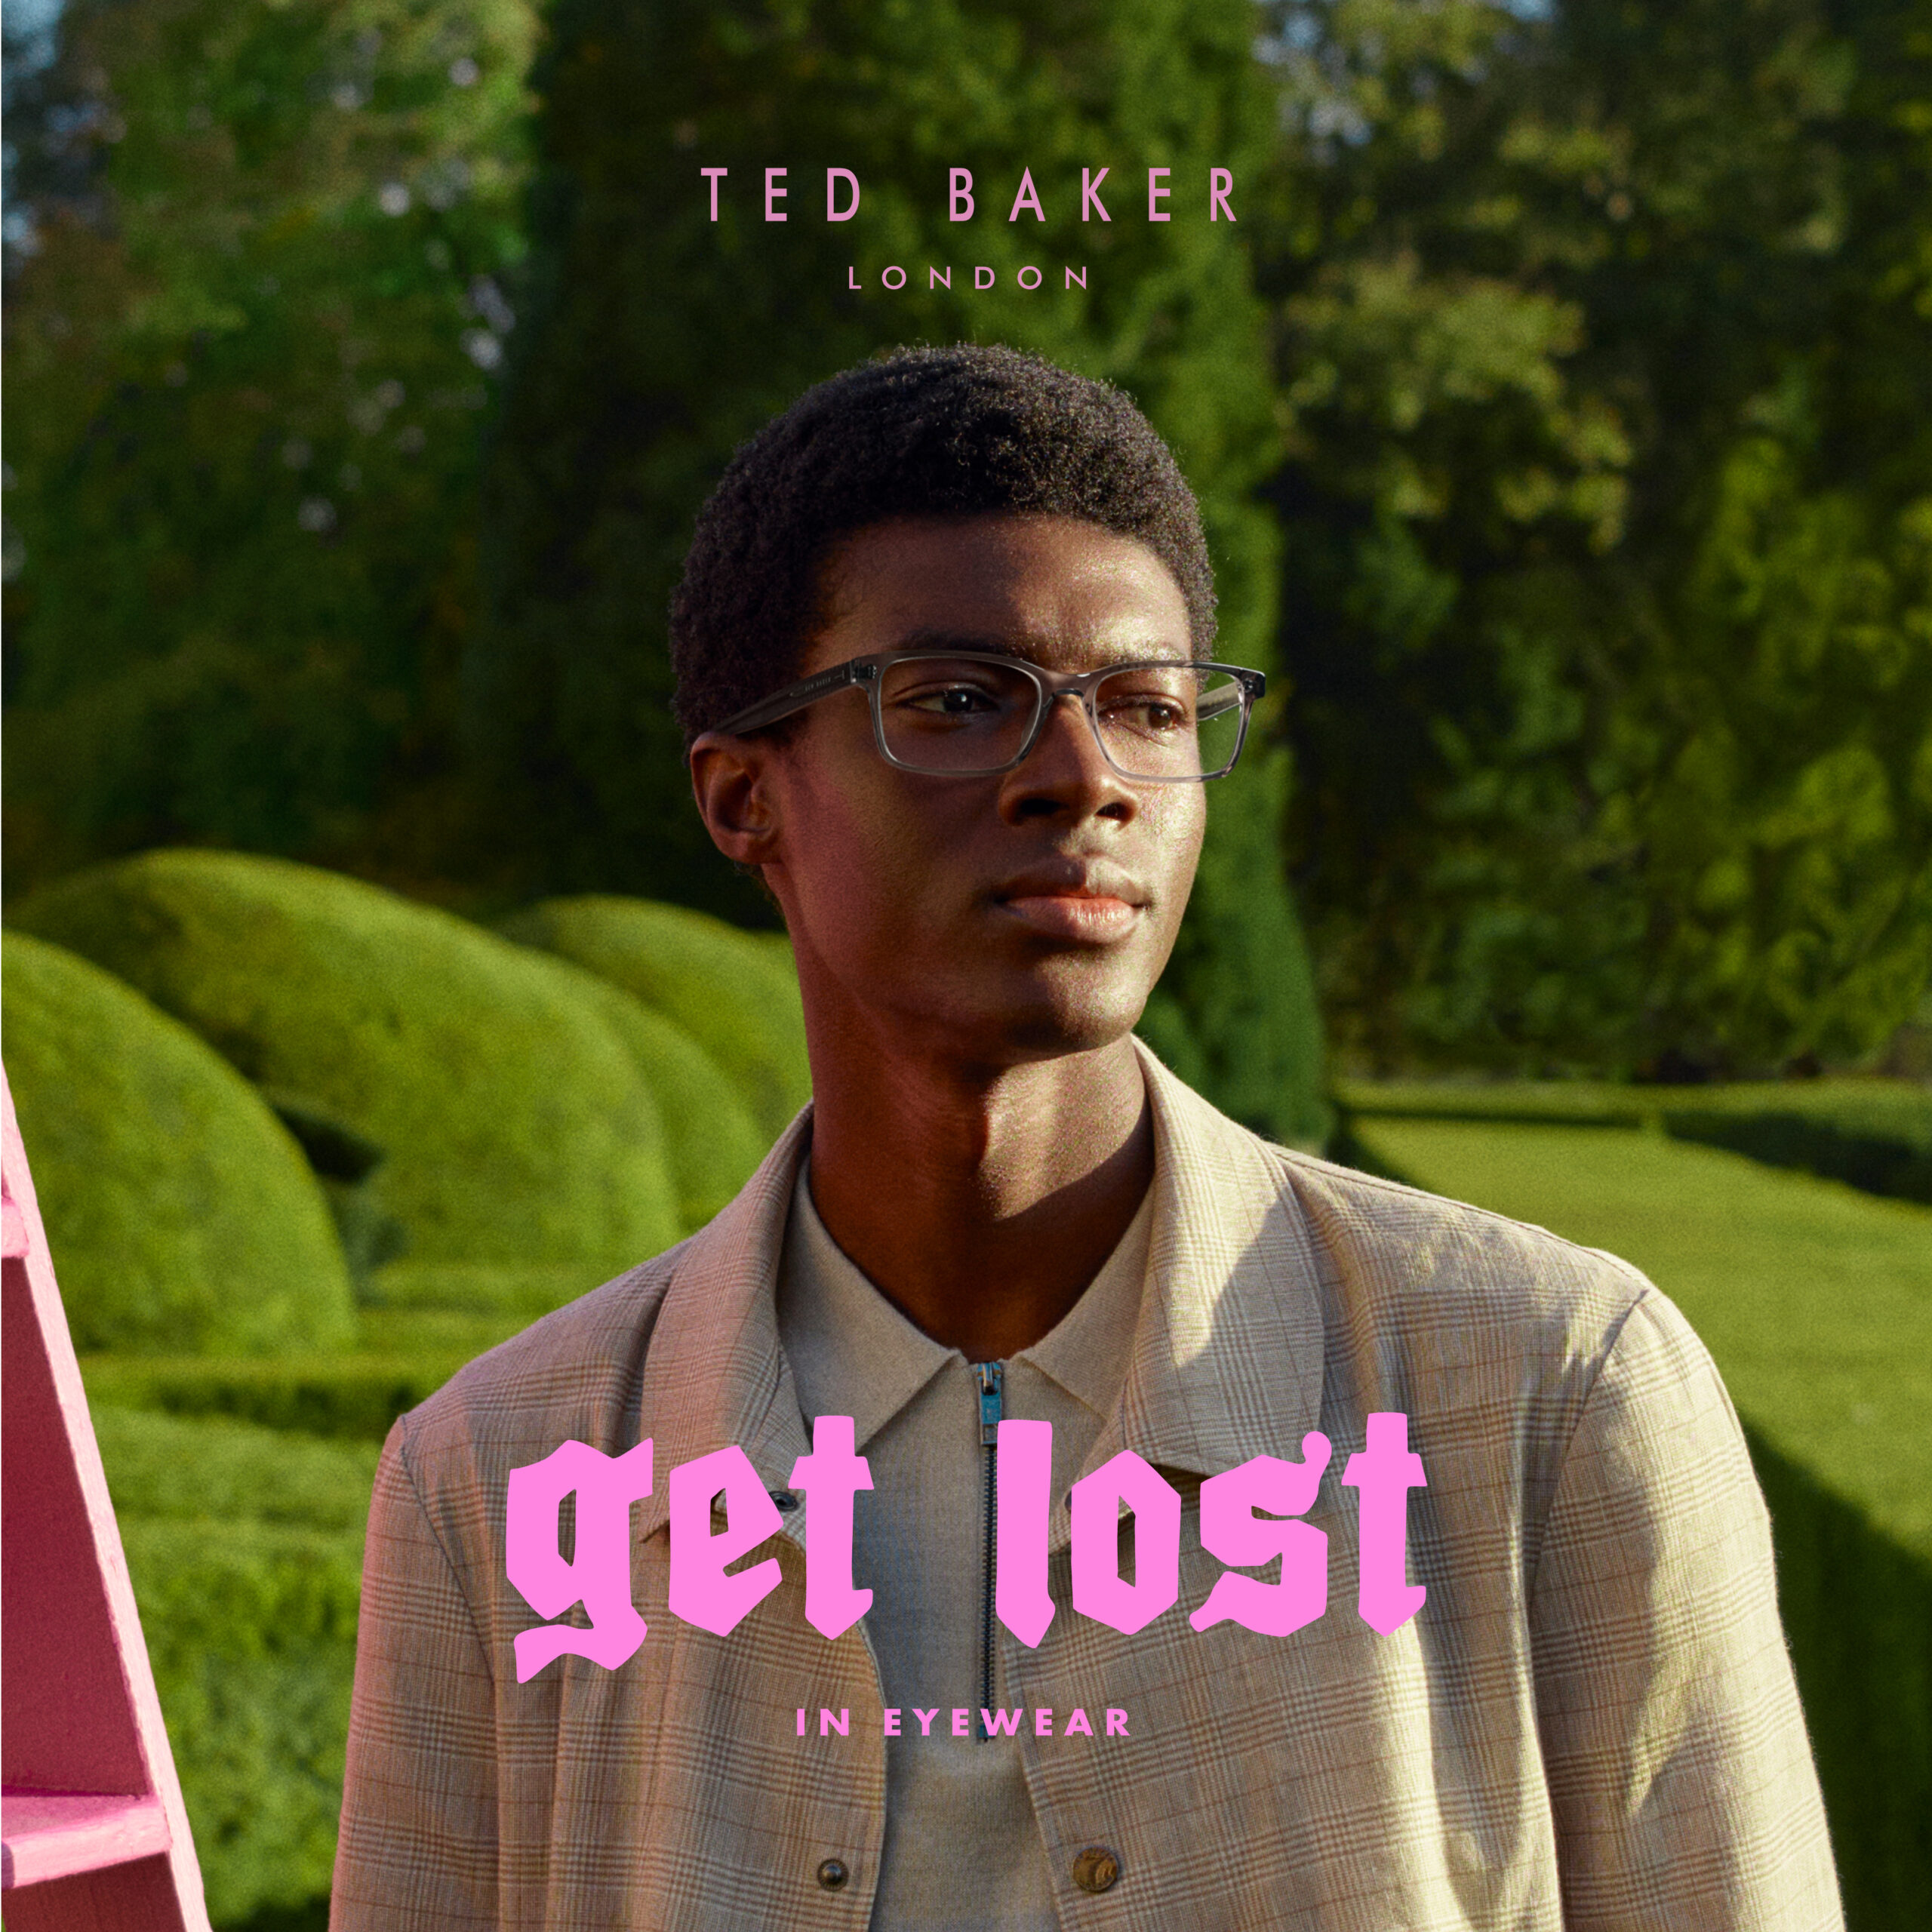 Ted Baker 'Get Lost in Eyewear' men's optical campaign image